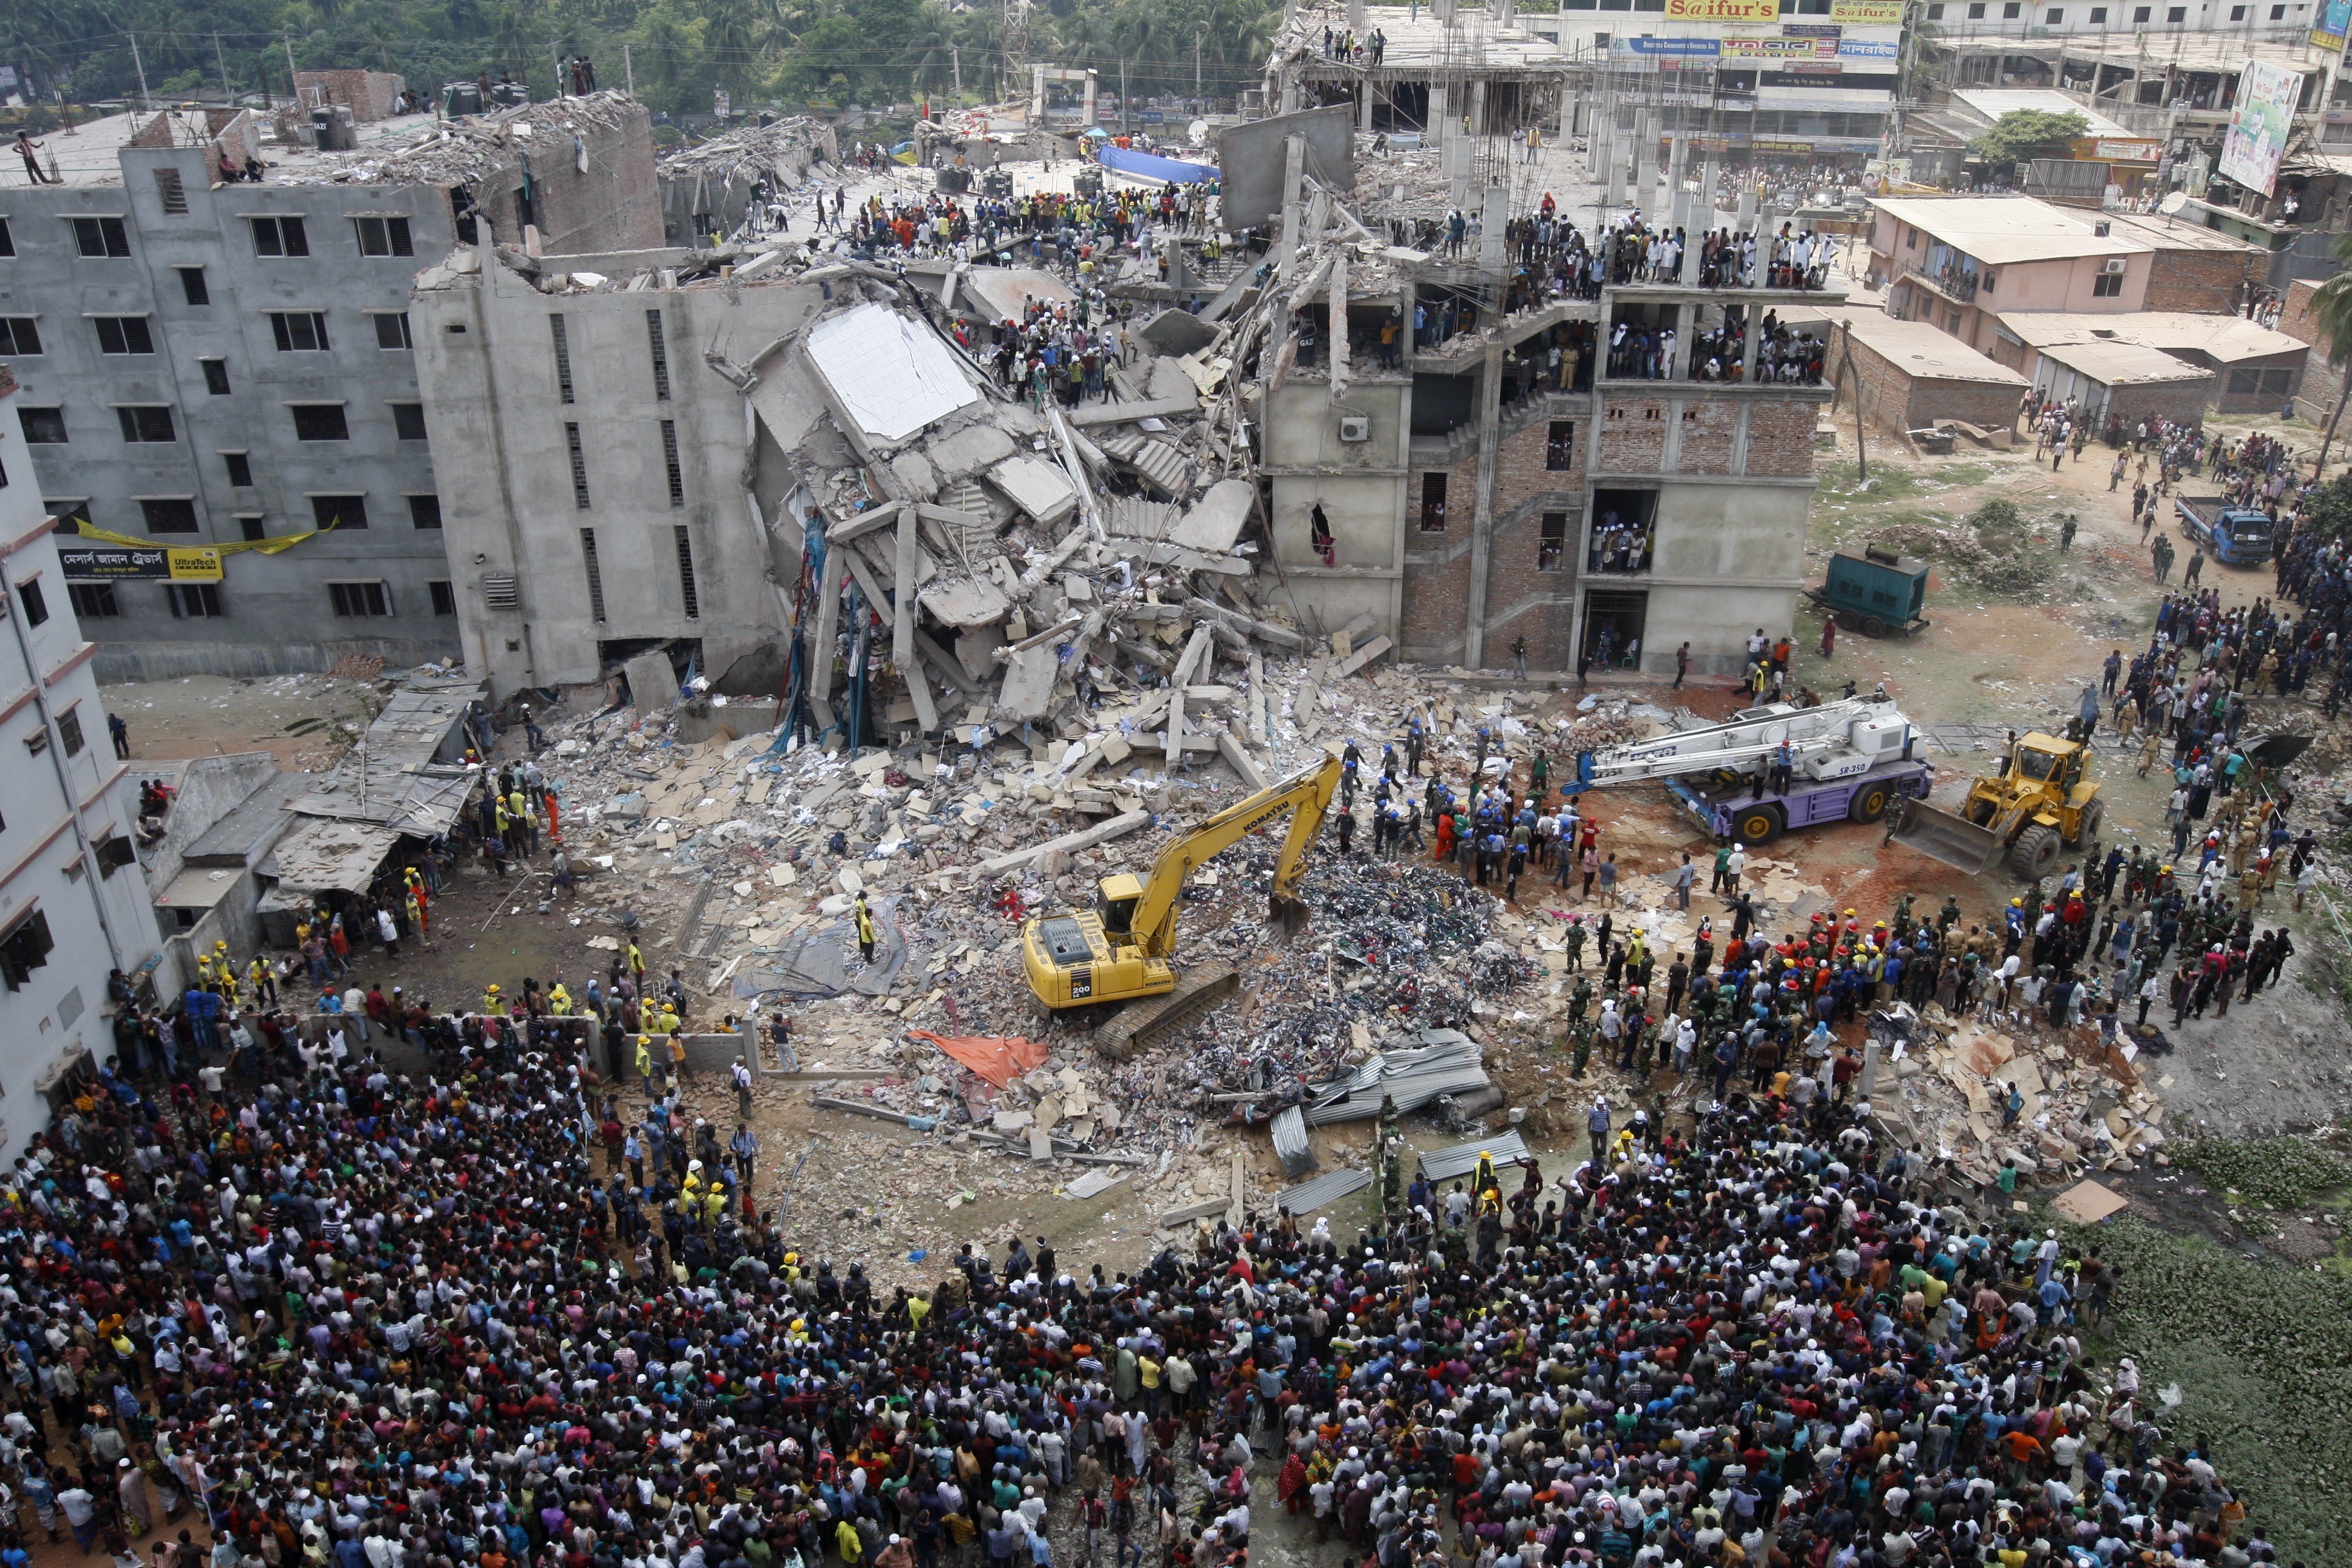 Rescuers at the collapsed Rana Plaza building in 2013. Photo: EPA